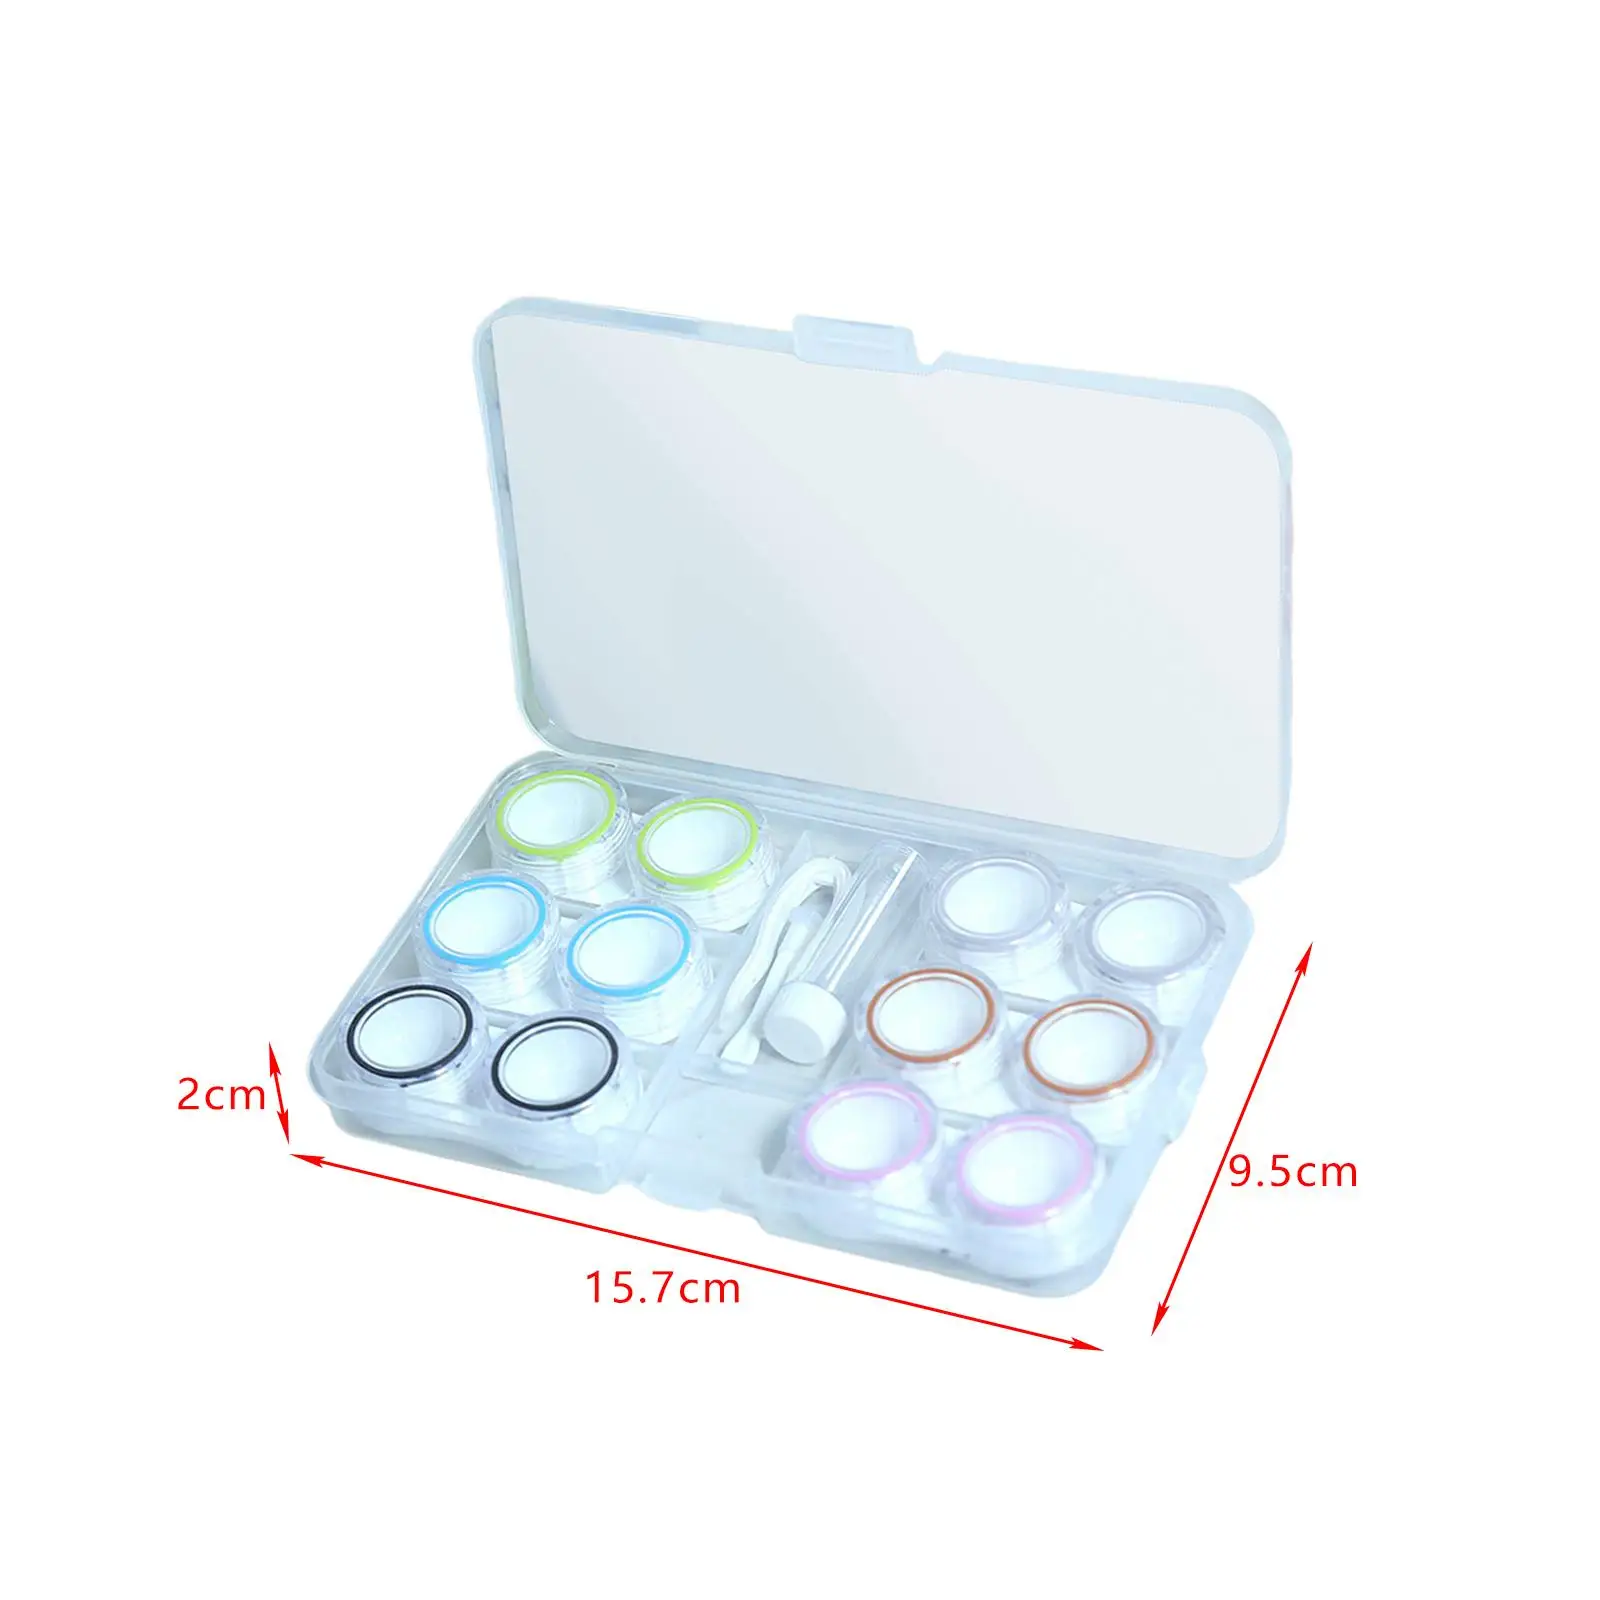 2-4pack Travel 6 Pairs Contact Lens Case Set Keeping Contact Lens Clean and